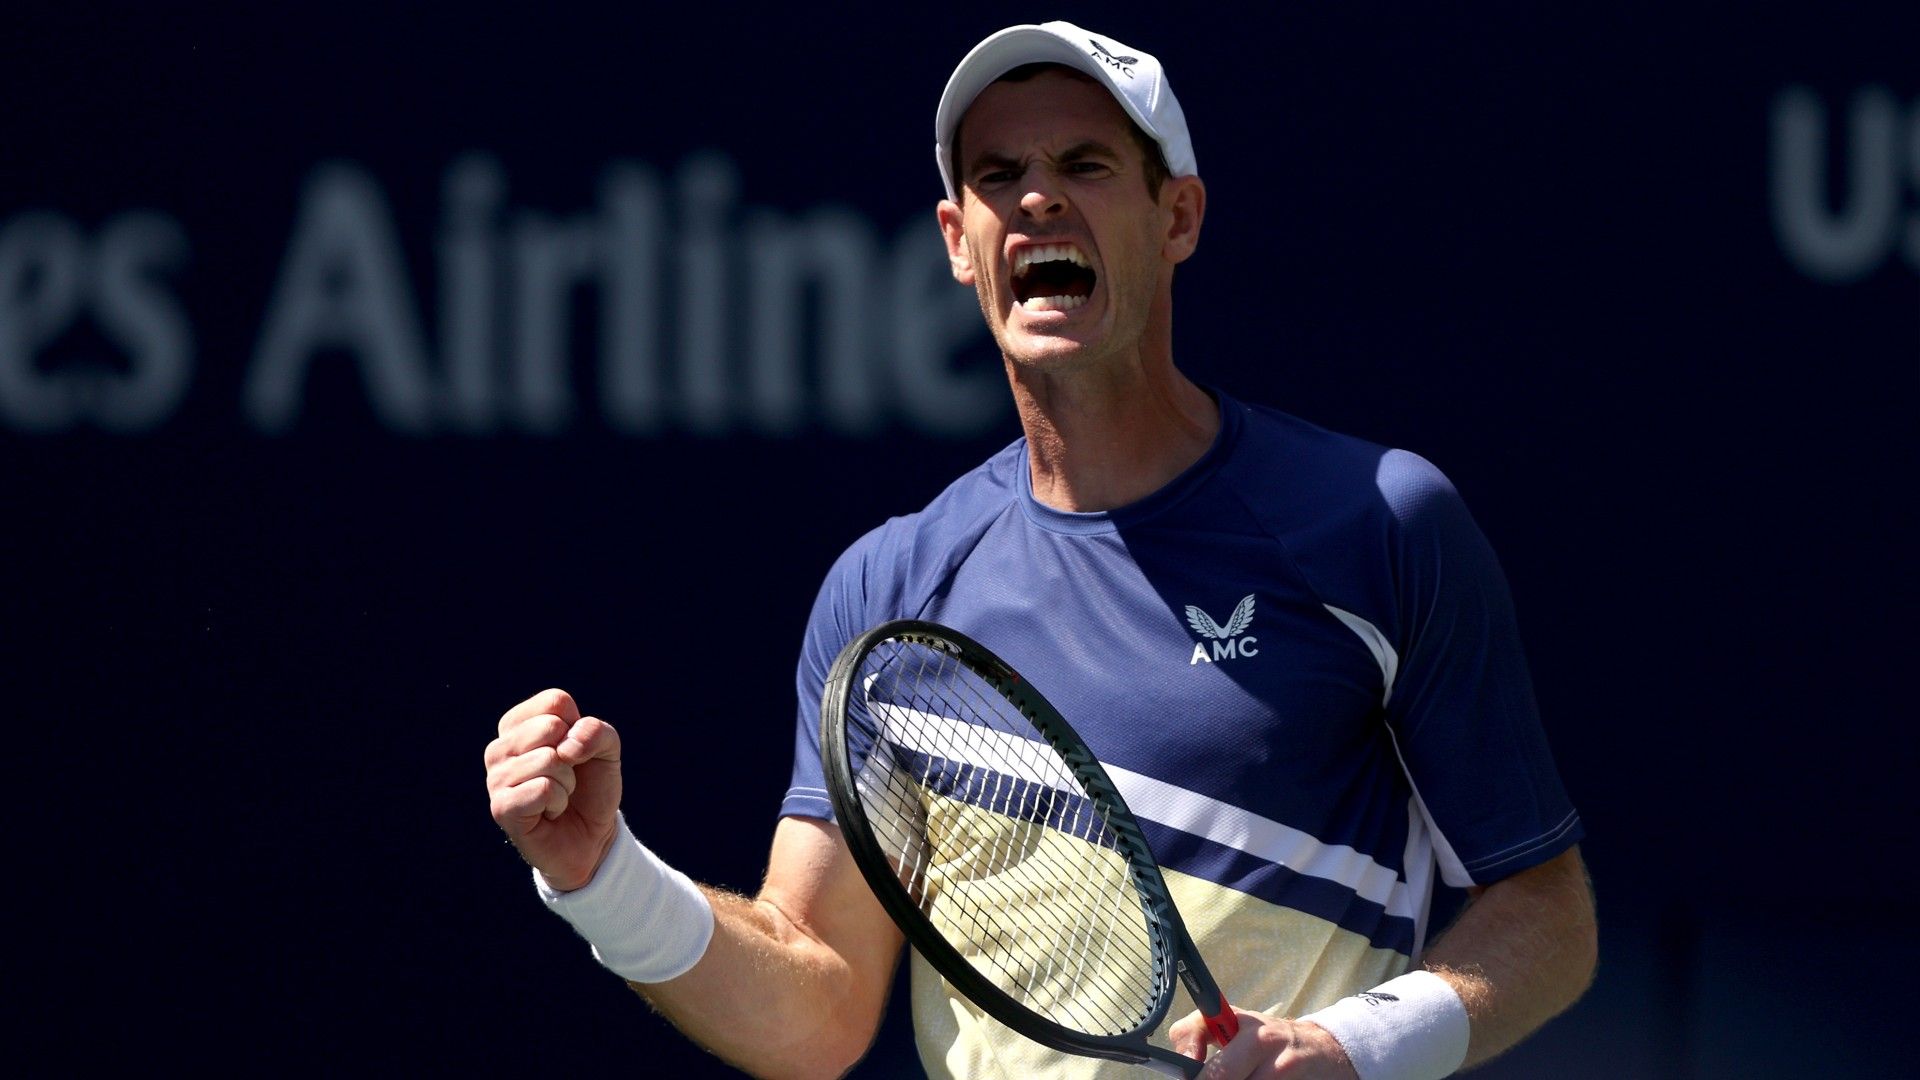 Murray matches Hewitt's record with 47th win at US Open